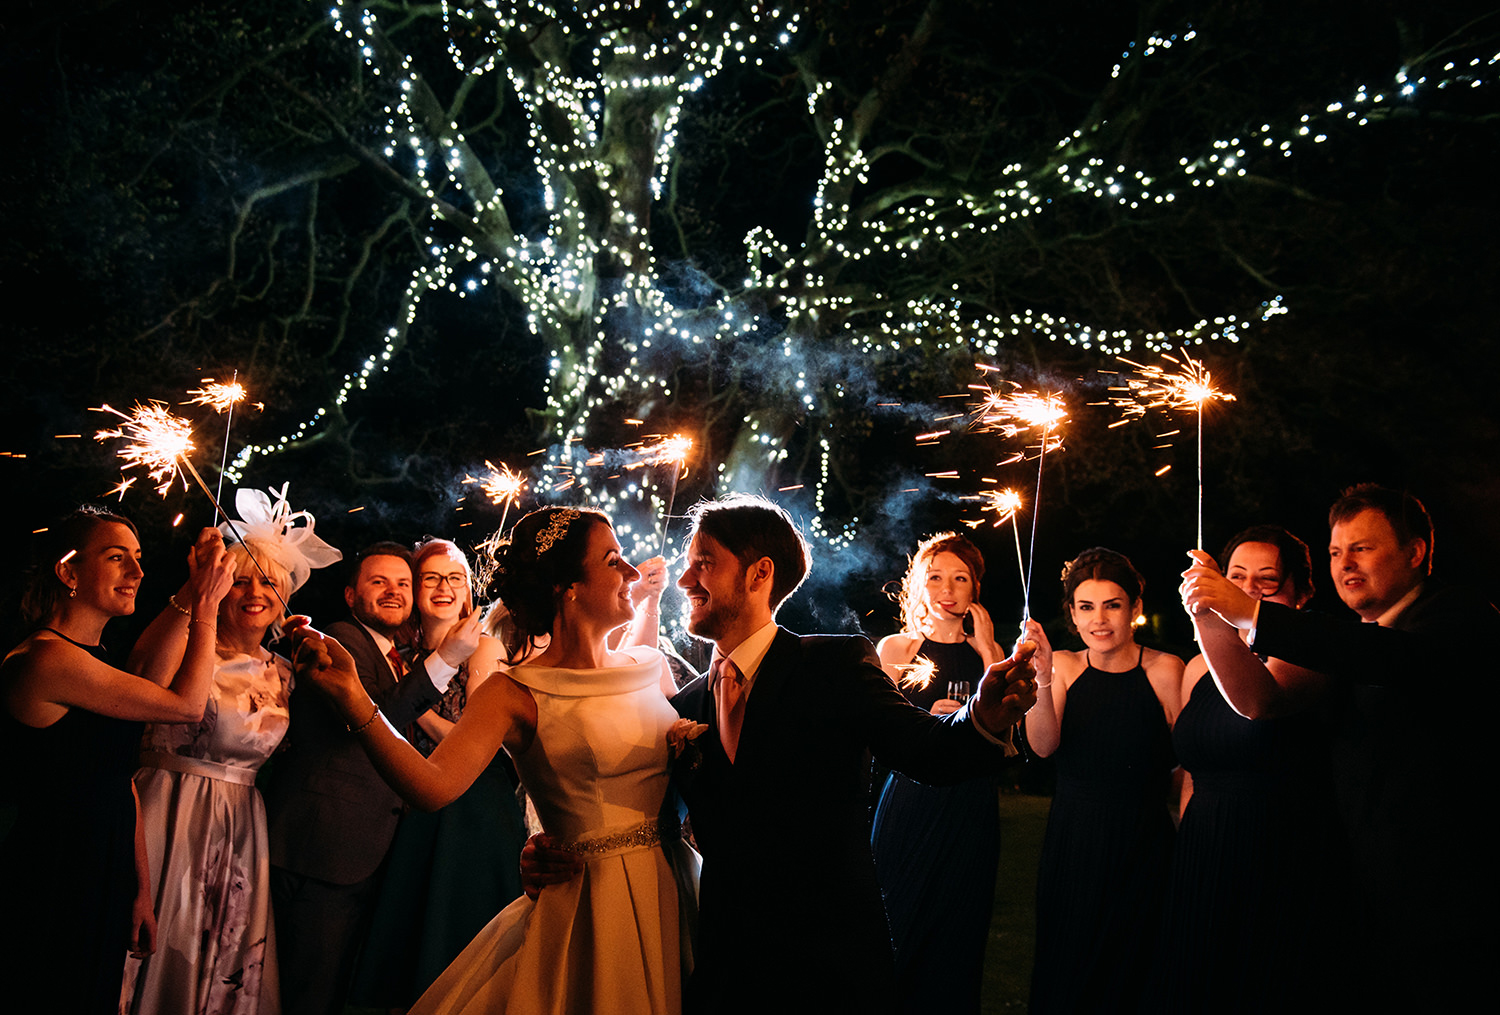  bride and groom with friends and sparklers 